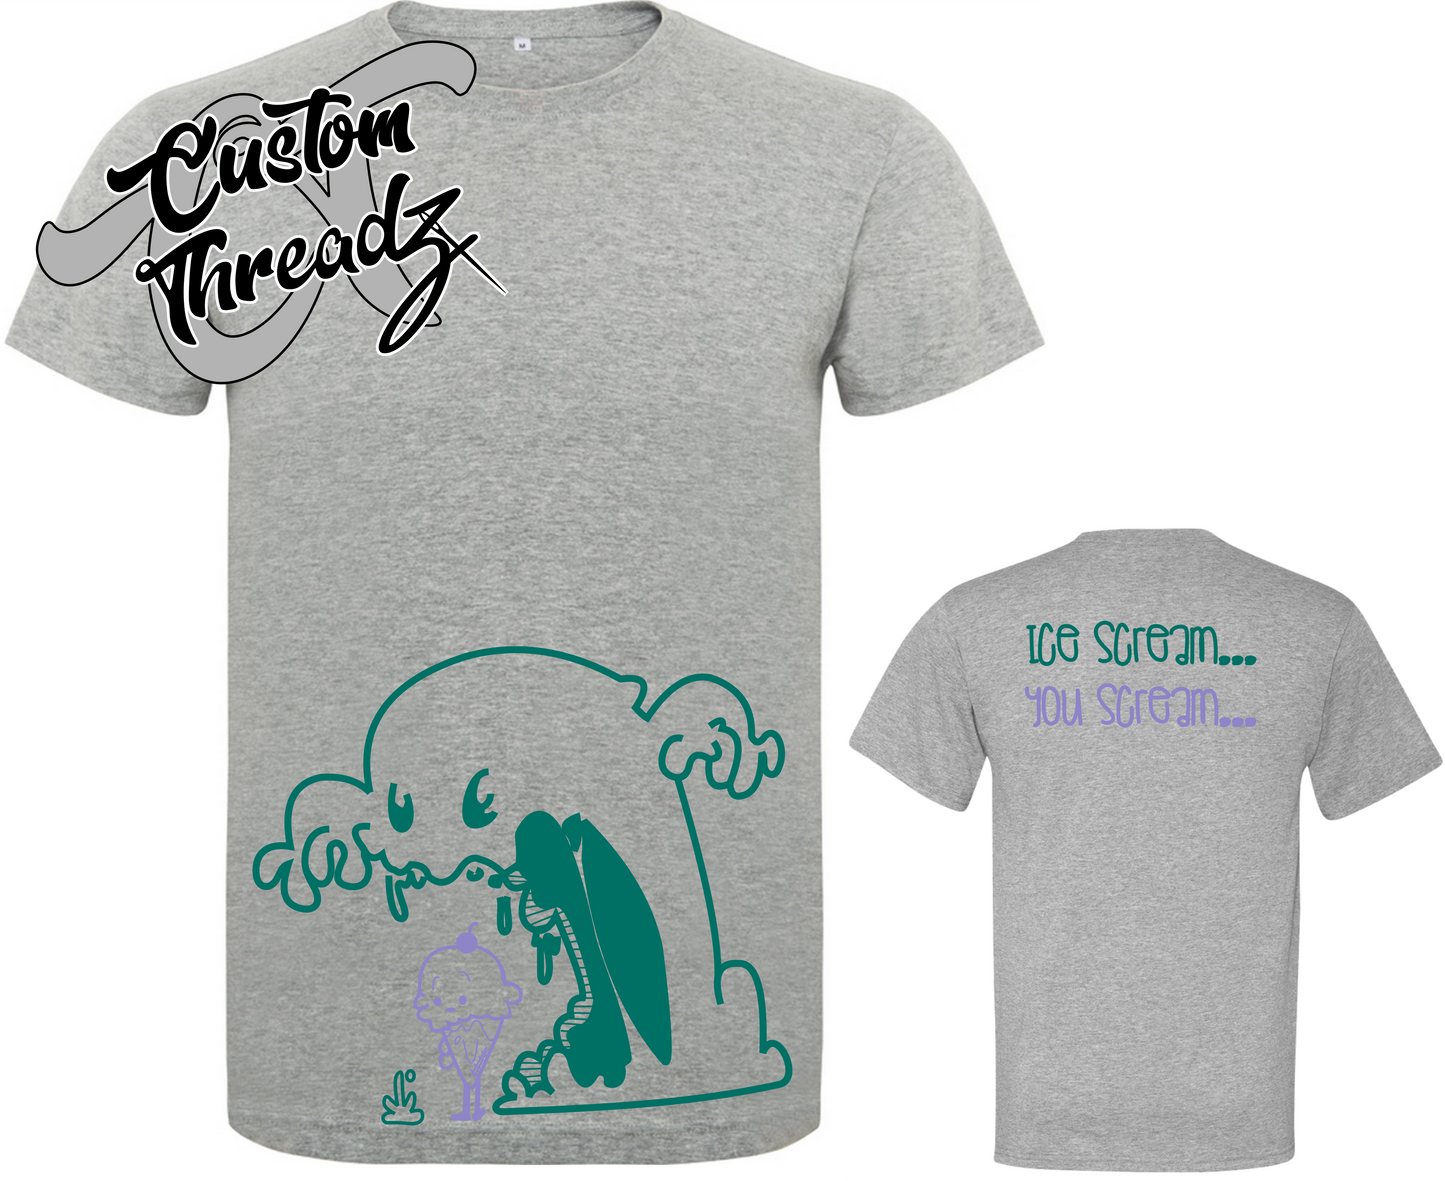 athletic heather grey youth tee with ice cream you scream ice cream monster DTG printed design